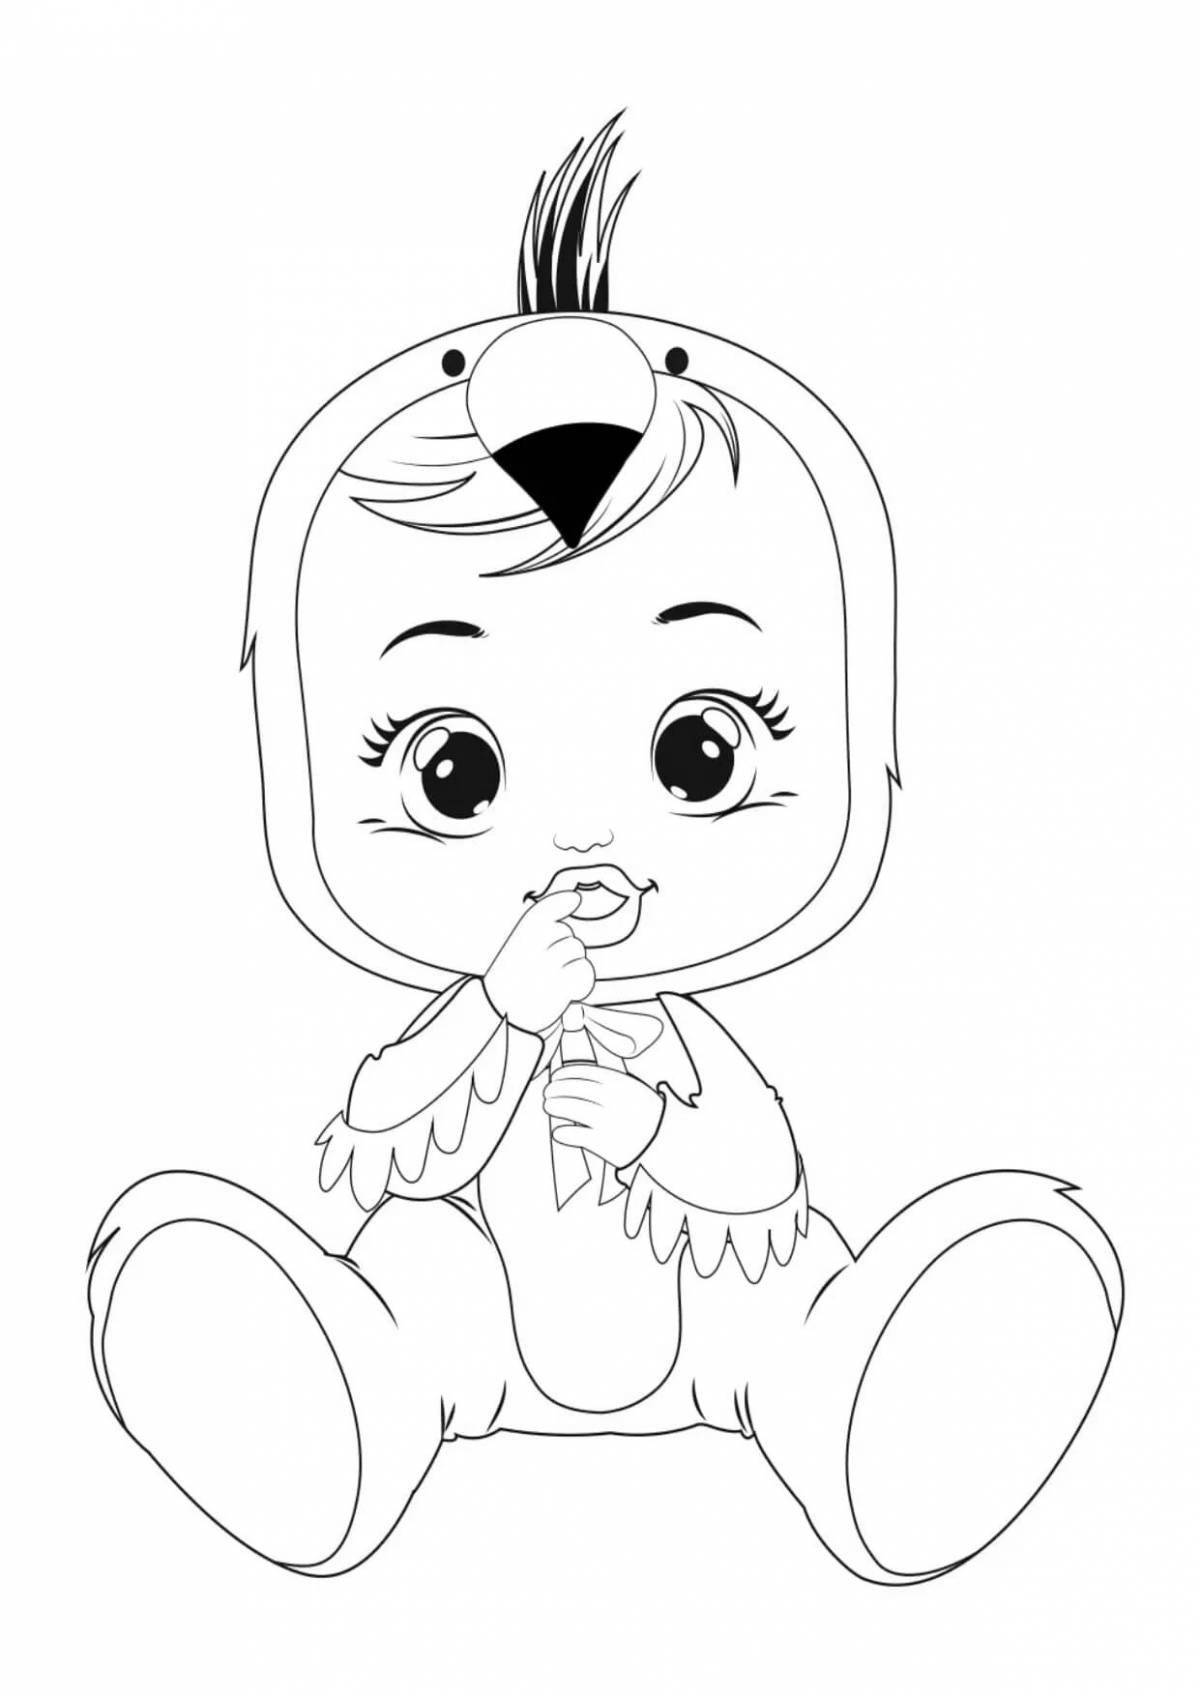 Crybaby freaky coloring book